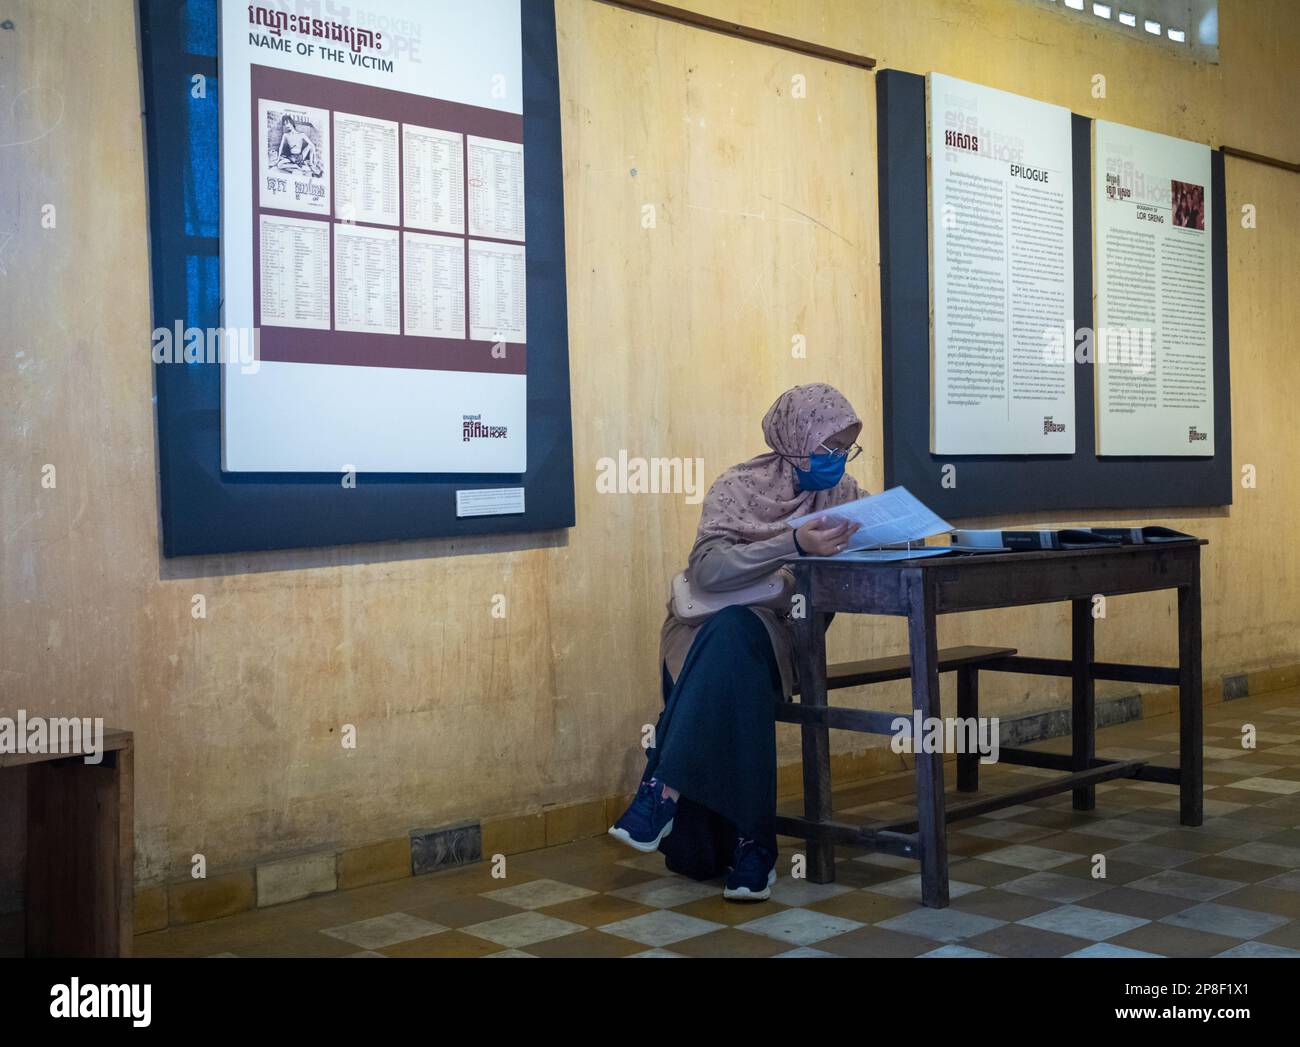 A Cambodian muslim woman reads testimonies in a former classroom in the notorious Tuol Sleng S-21 torture and genocide prison museum in Phnom Penh, Stock Photo